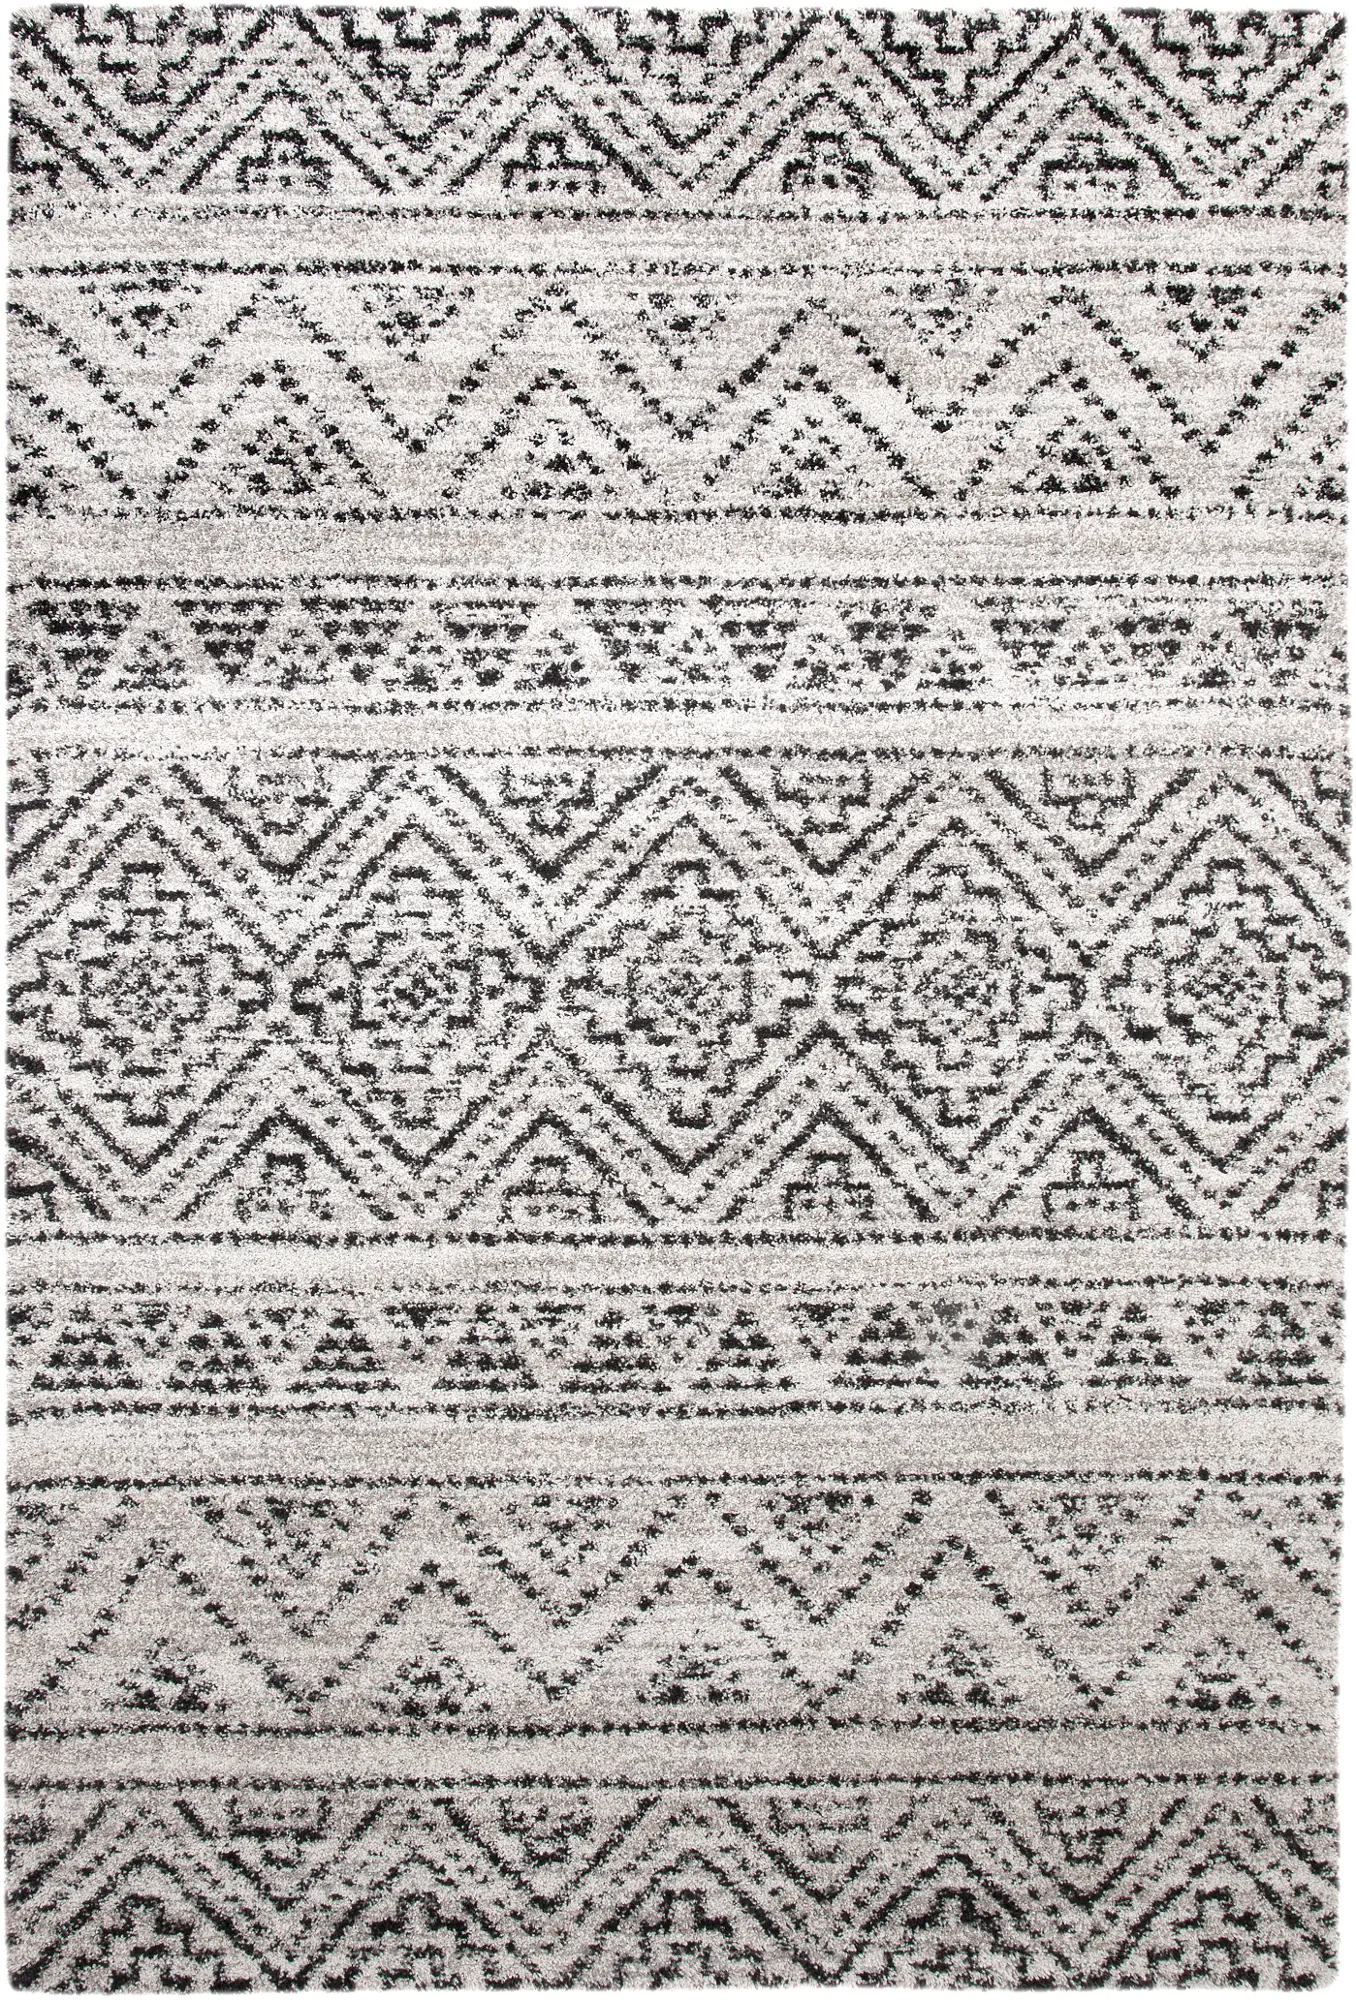 Granada 5 x 8 Beige, Ivory, and Charcoal Gray Area Rug